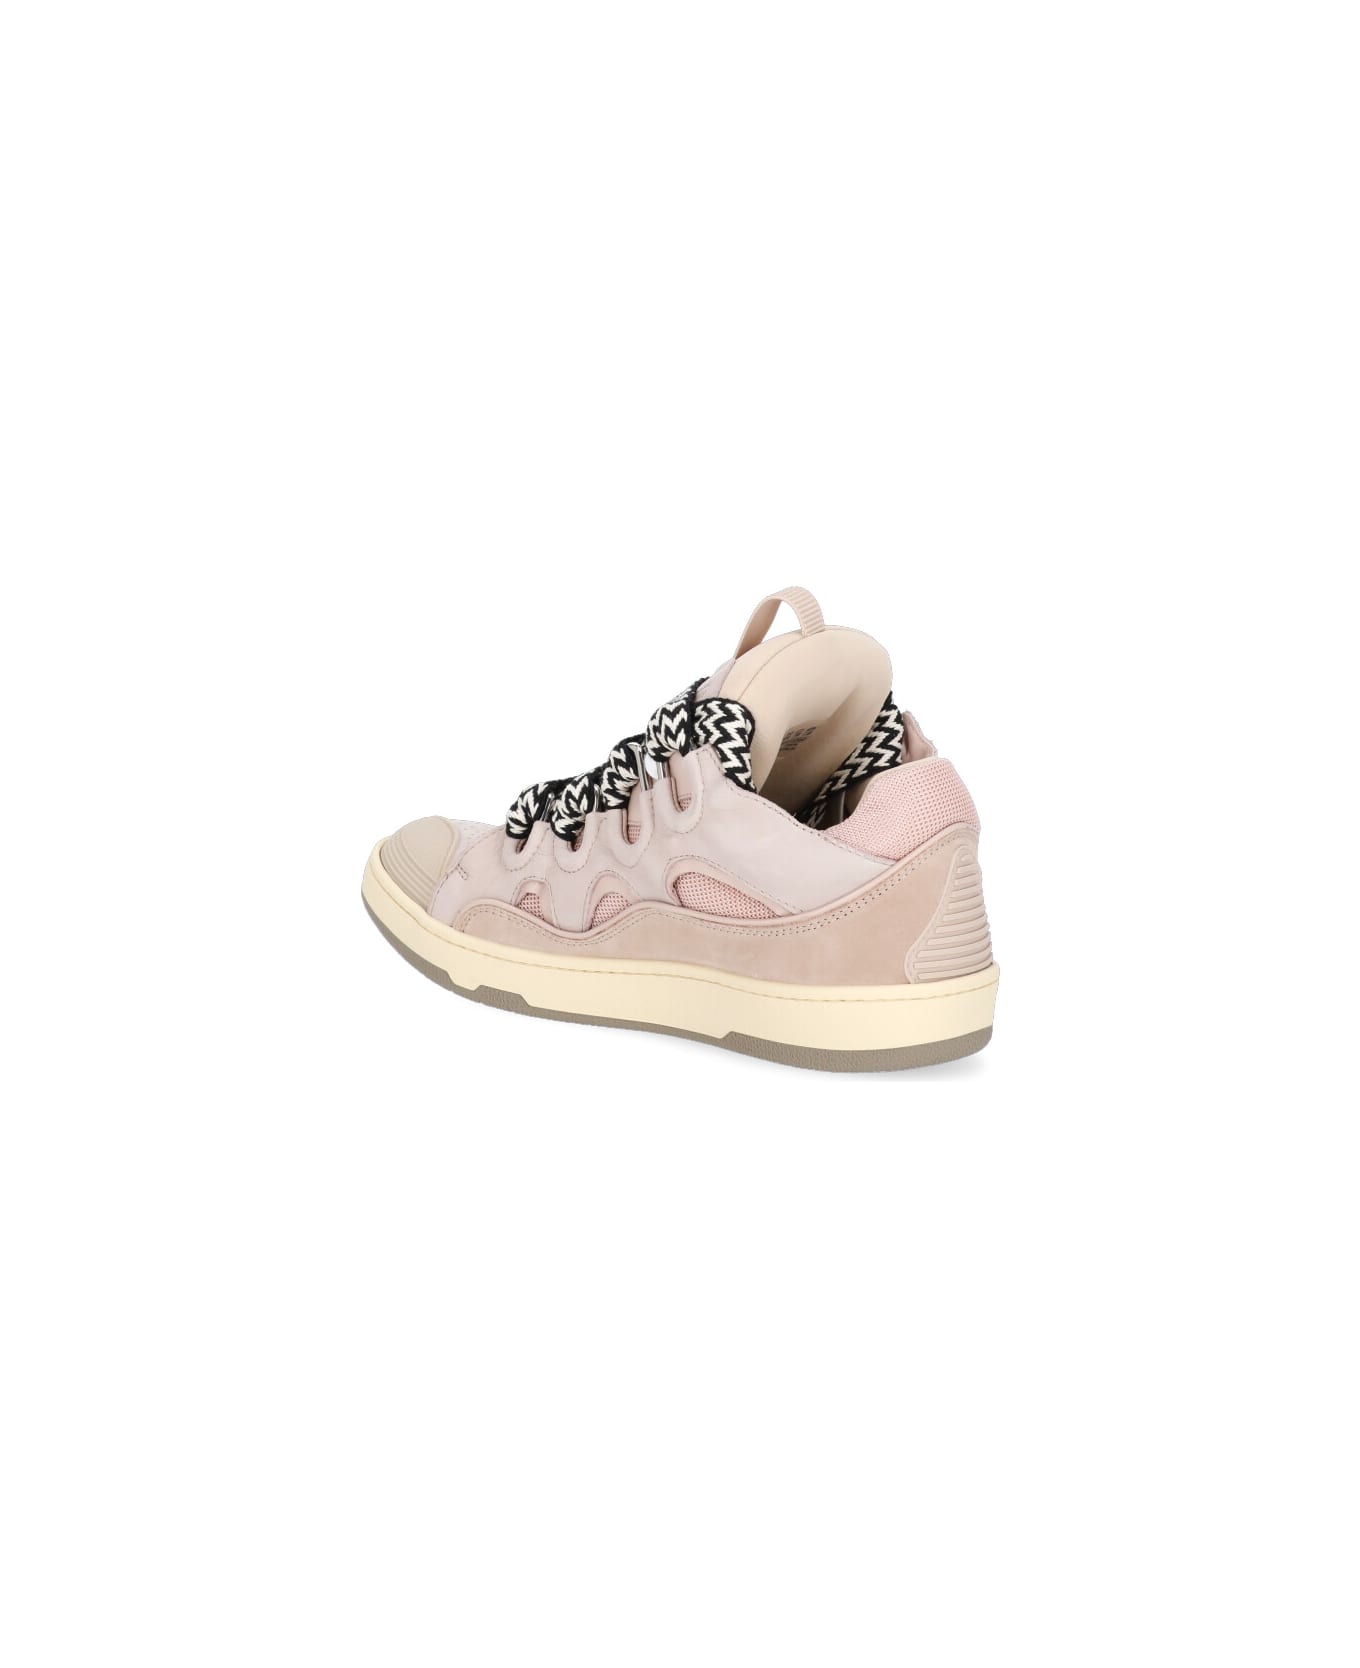 Lanvin Curb Sneakers - Pink スニーカー